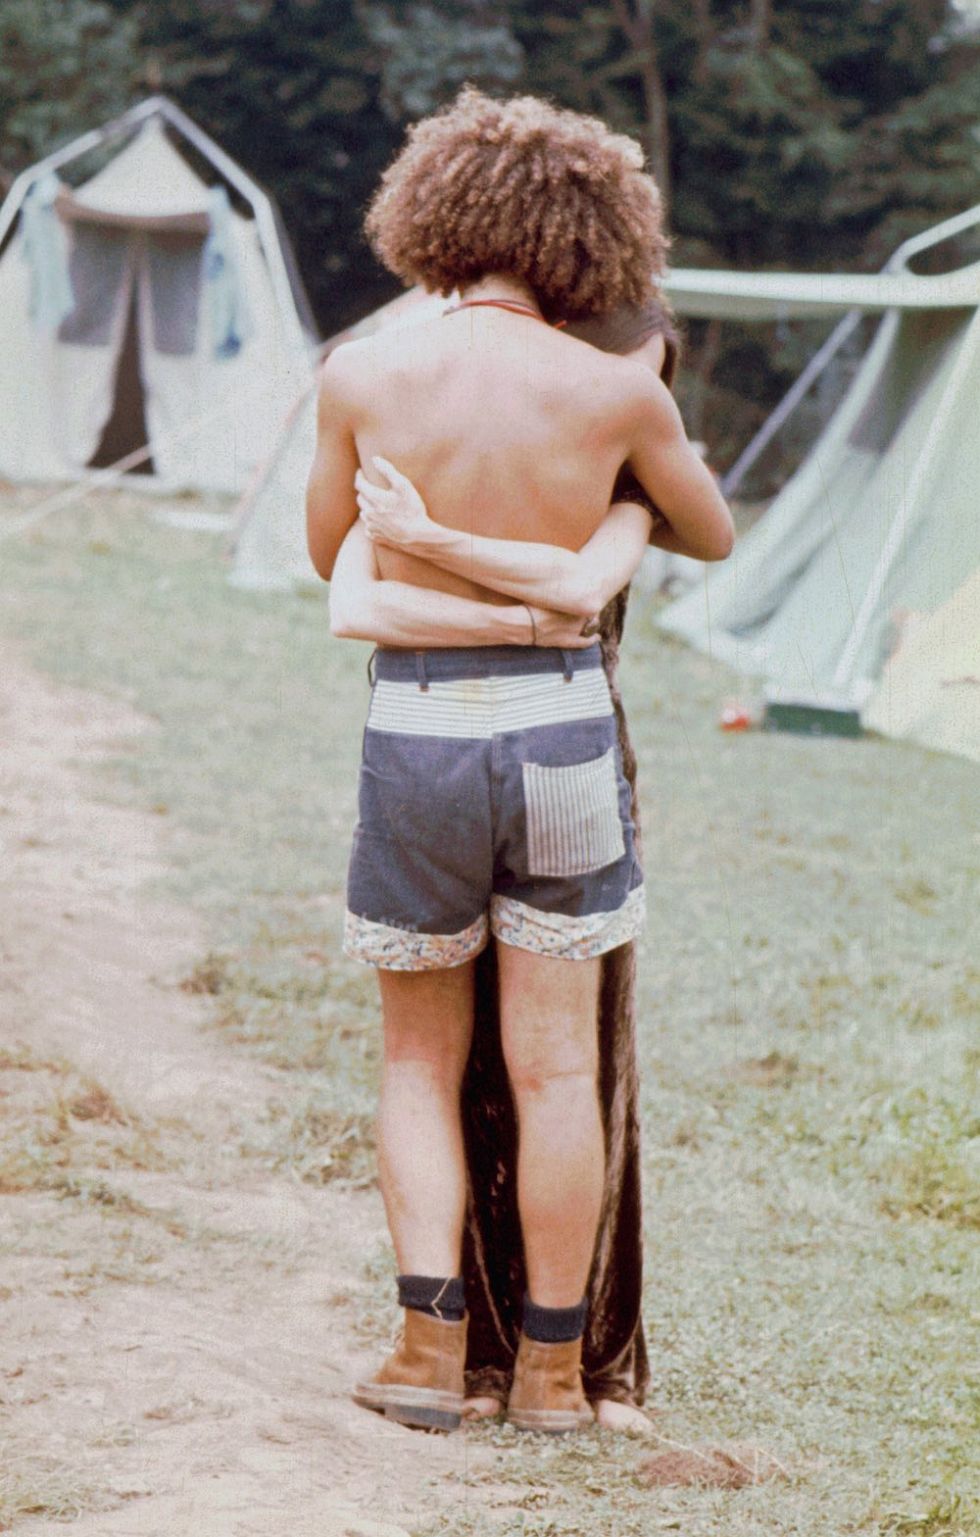 One of the dancers hugs someone on the dirt road as they stand near the tents.